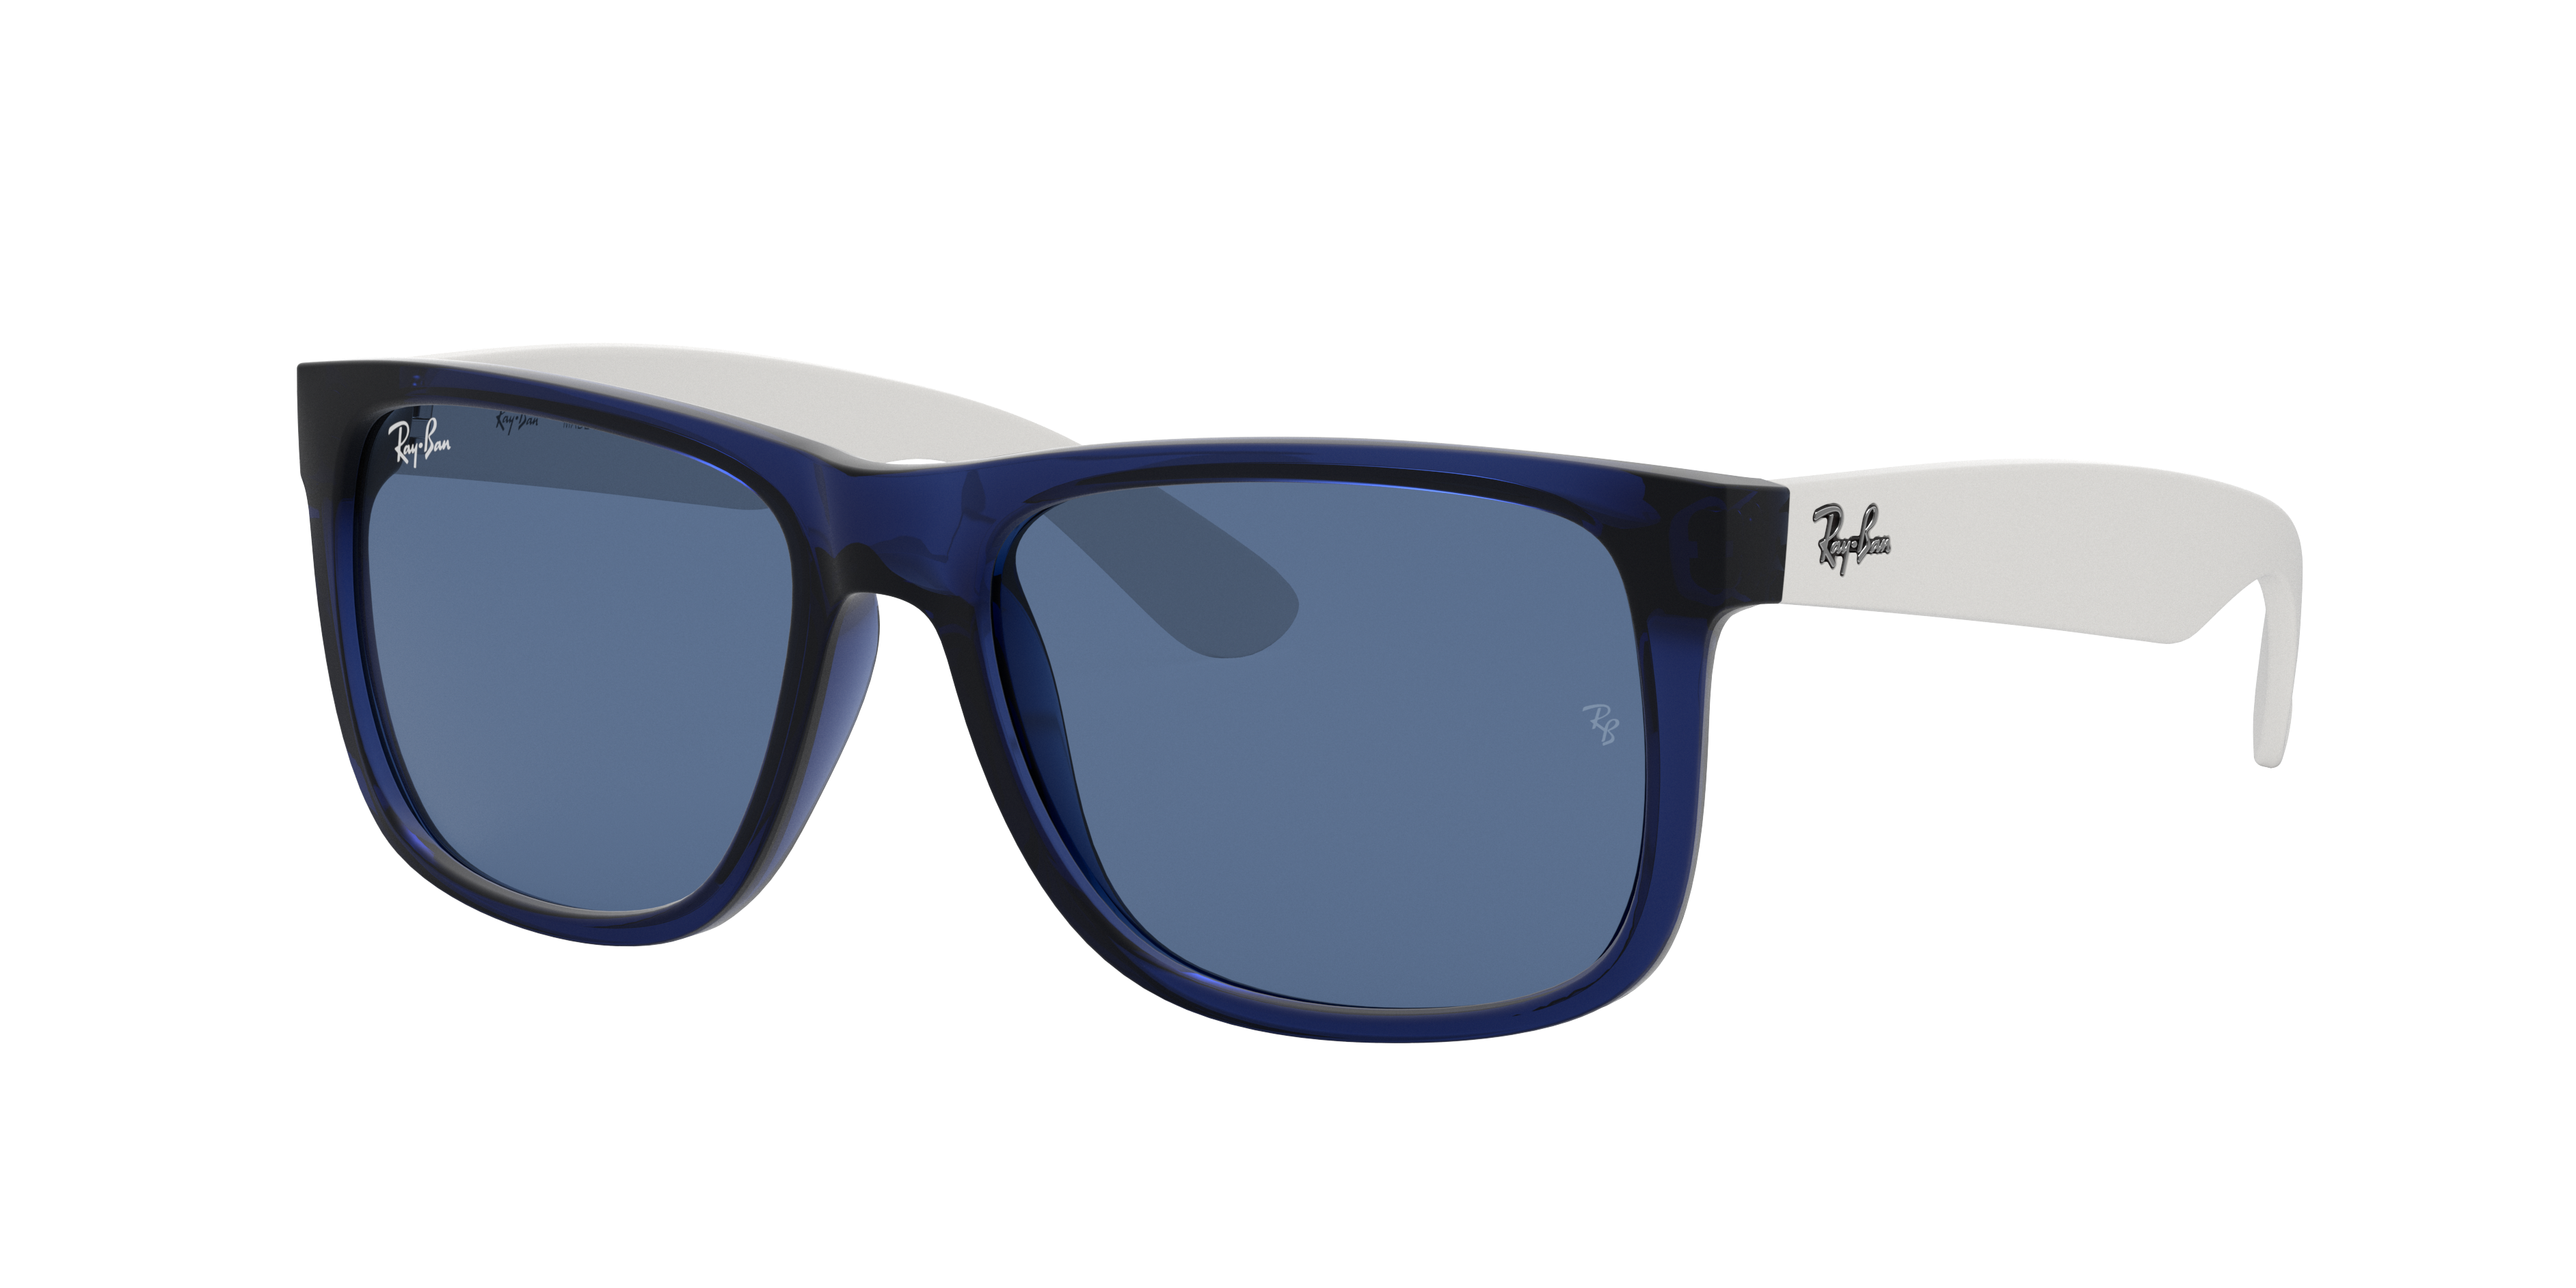 Ramen wassen lava schors Justin Color Mix Sunglasses in Transparent Blue and Dark Blue - RB4165 | Ray -Ban® US